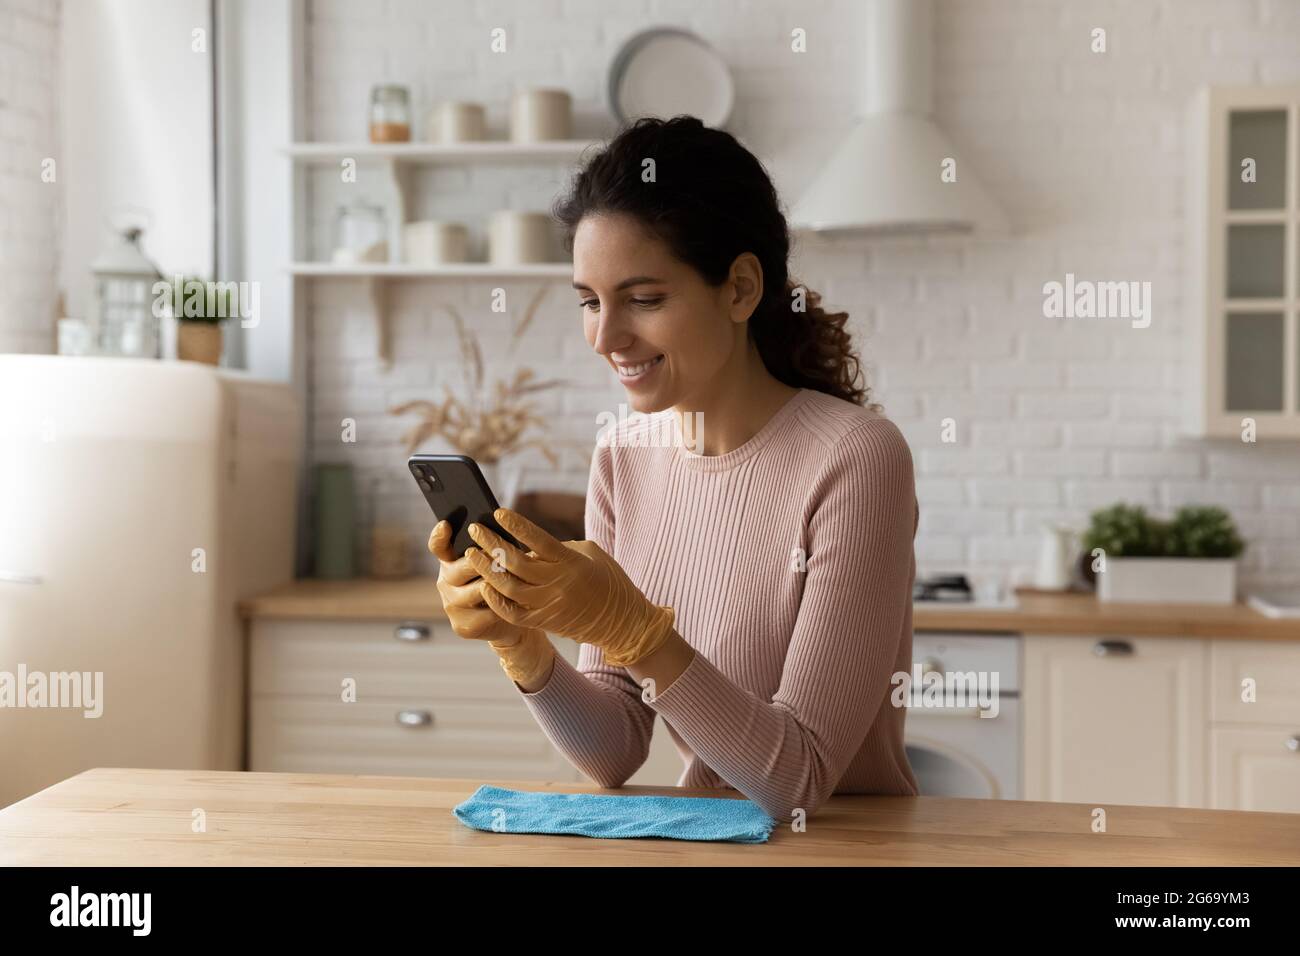 Distracted from cleaning young woman sending message on smartphone. Stock Photo